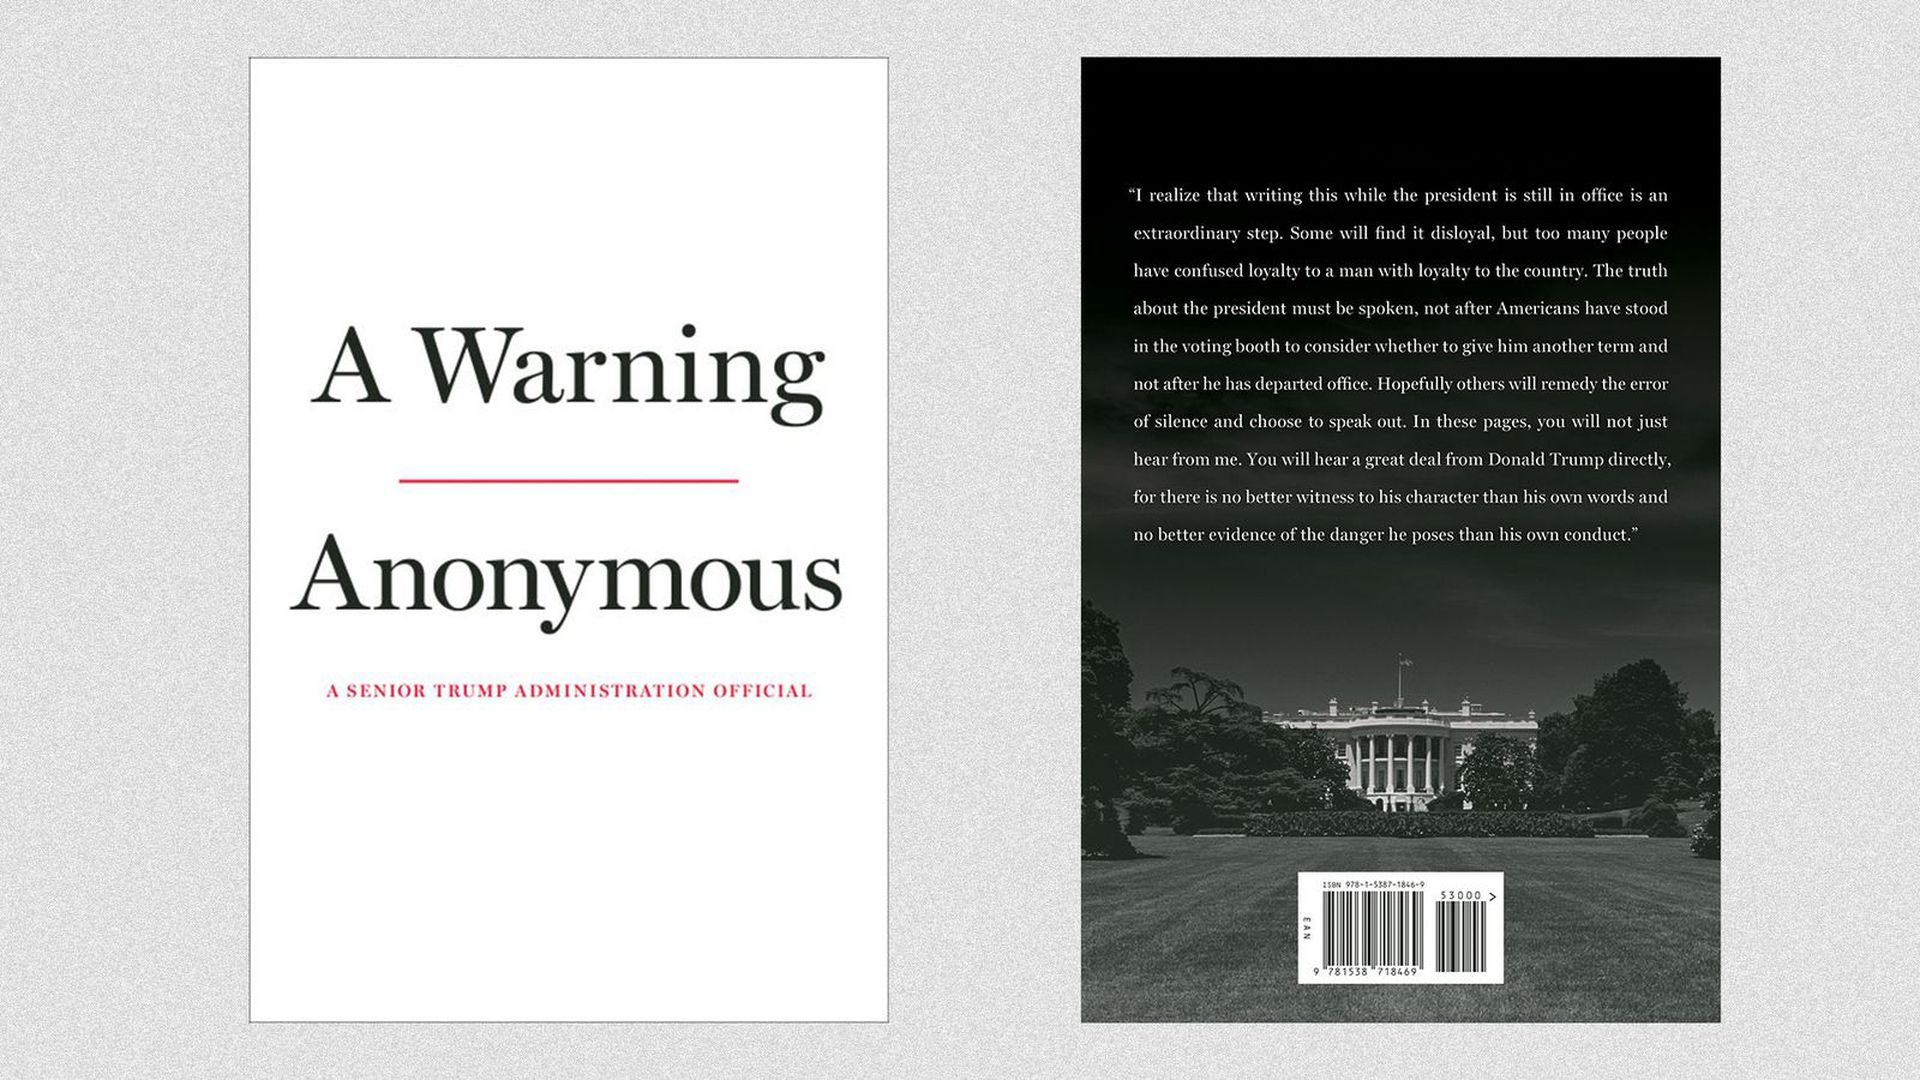 A graphic of the book cover by the anonymous Trump administration official.